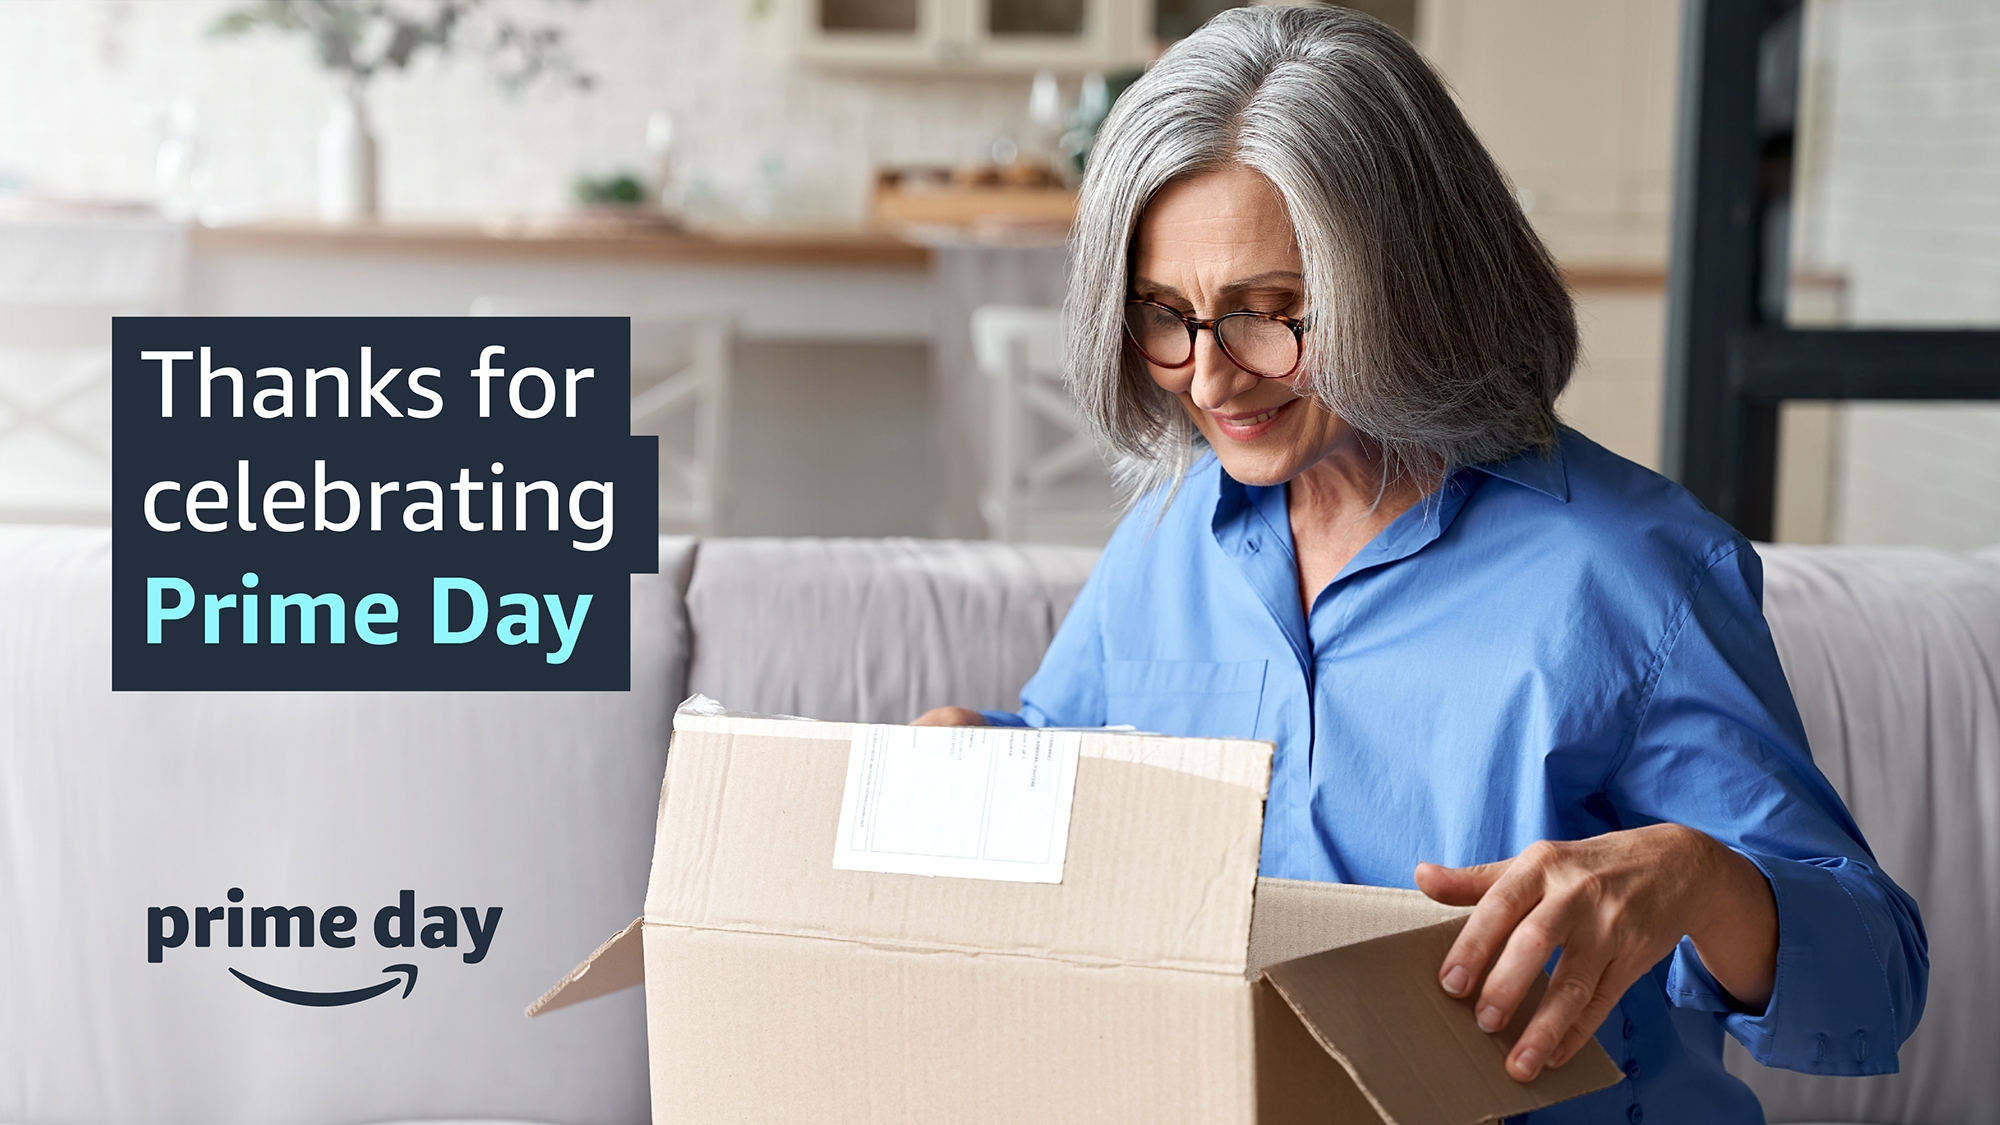 An image of a woman smiling while opening a package. Text on the image reads "Thanks for celebrating Prime Day" and there is the Amazon smile logo with the words "Prime Day" above it lower down. 